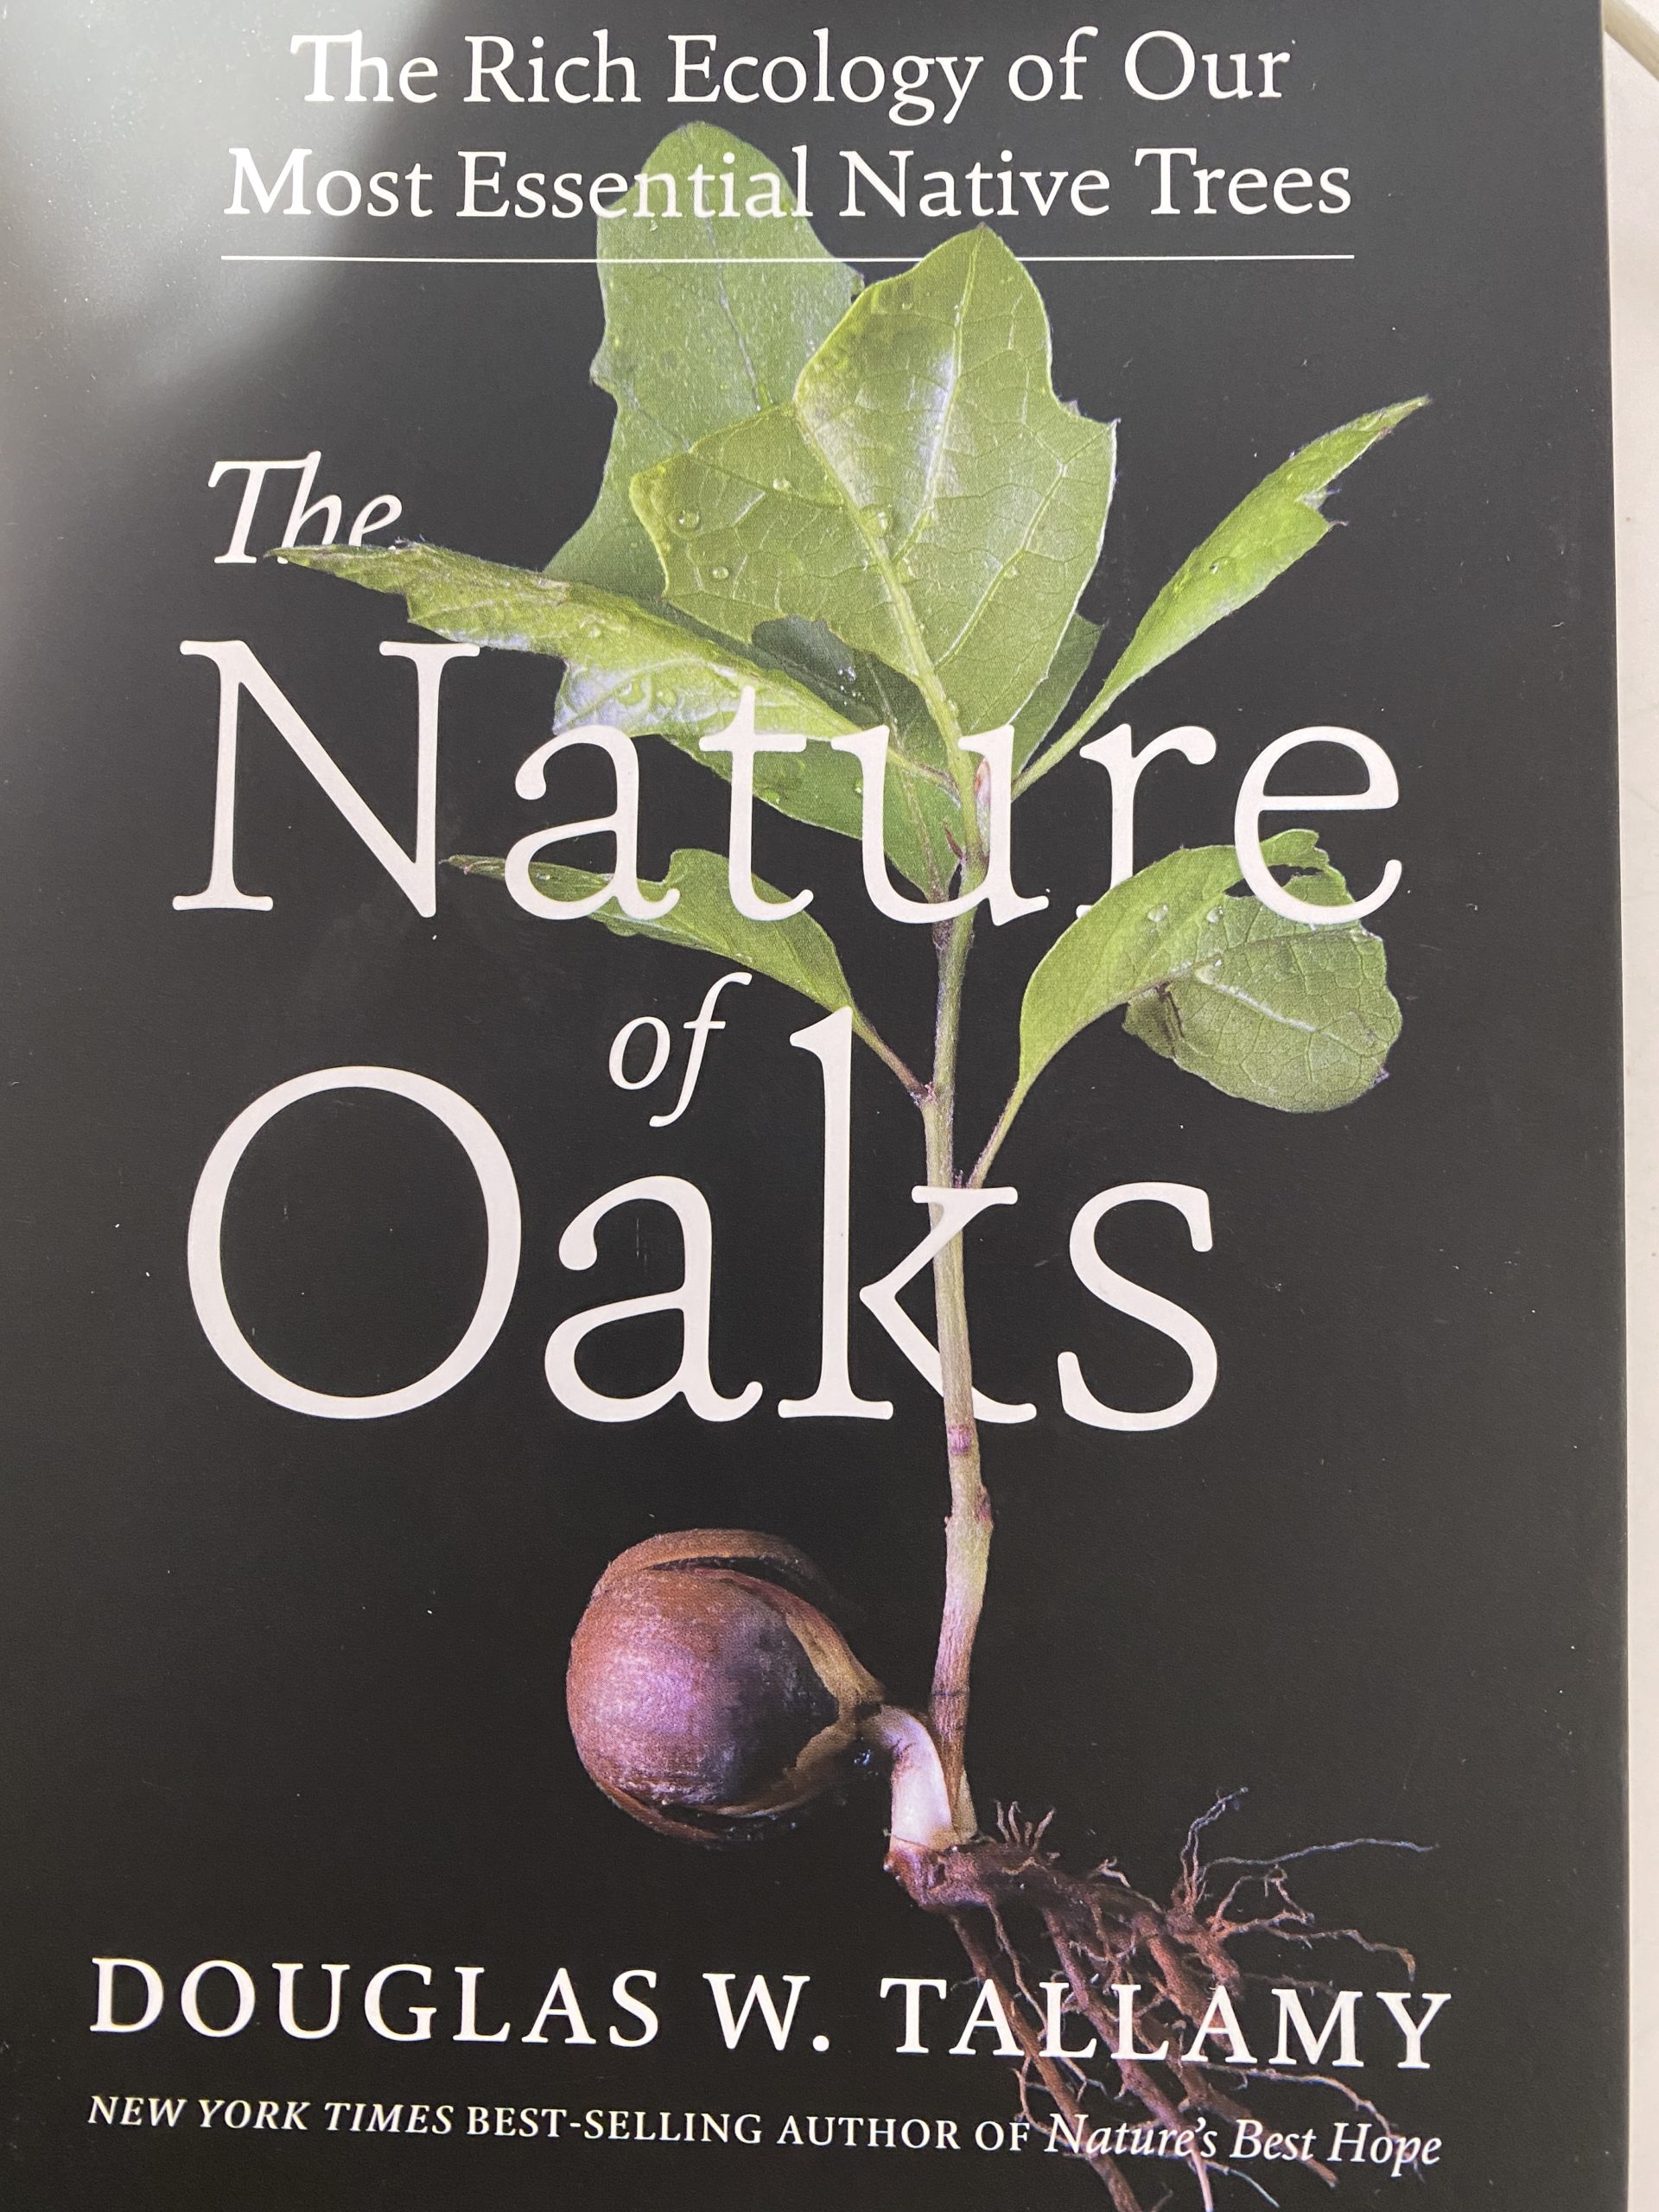 book cover of "The Nature of Oaks" by Douglas Tallamy